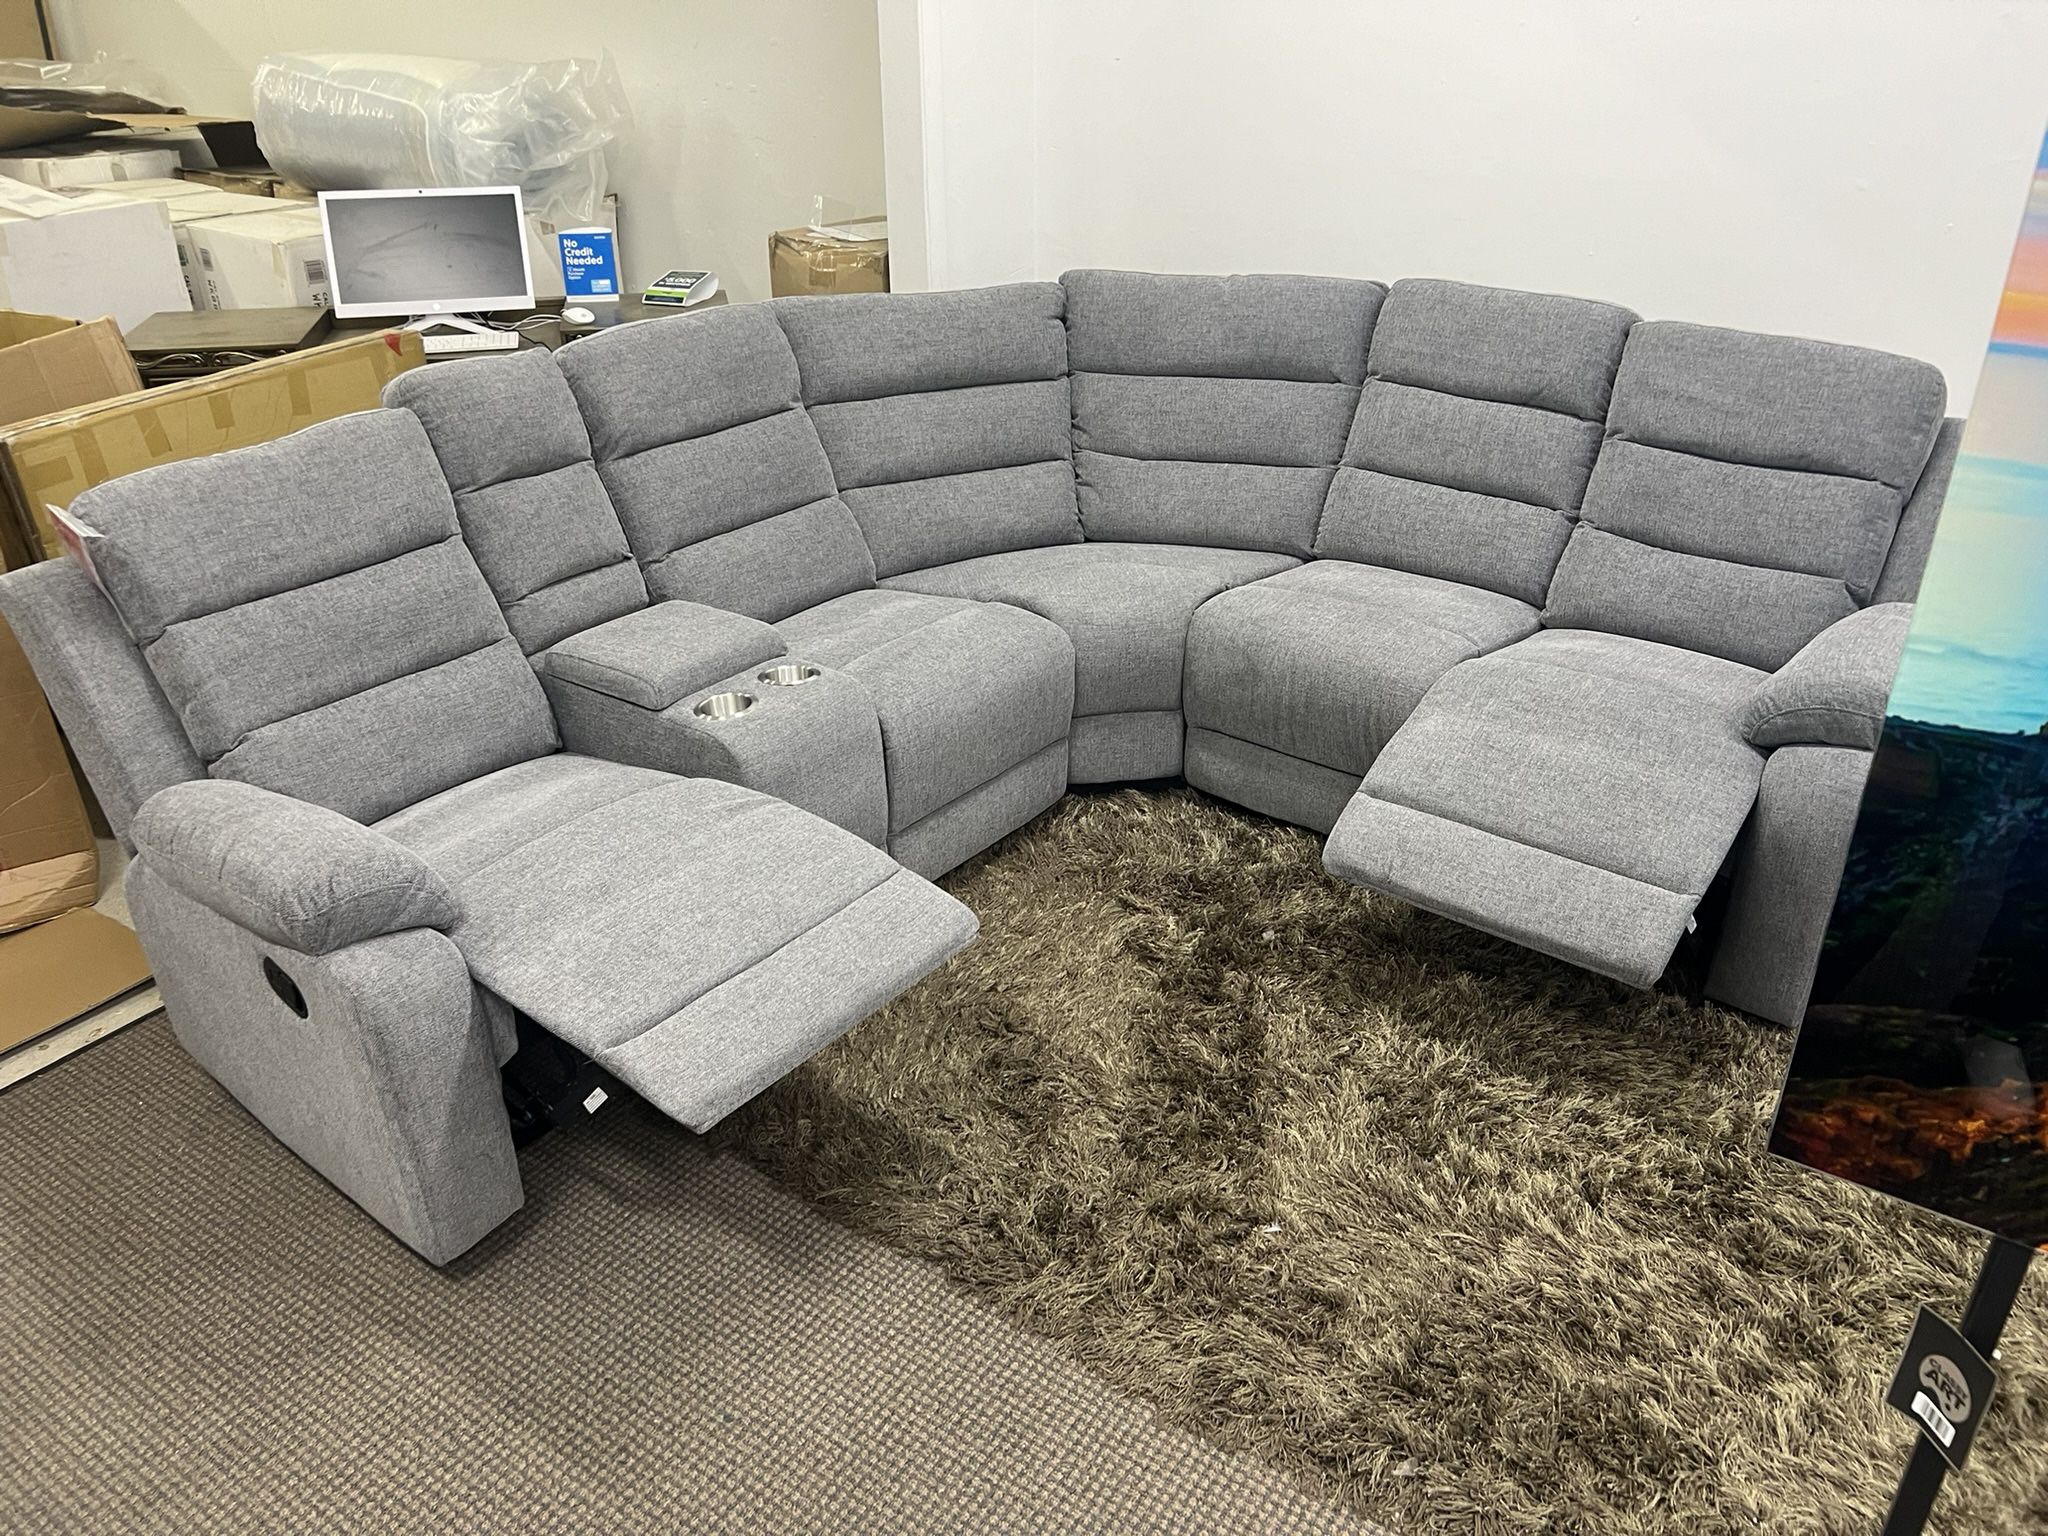 🛋️NEW!! BARGAIN 2 Recliner Sectional STILL IN BOX 📦 